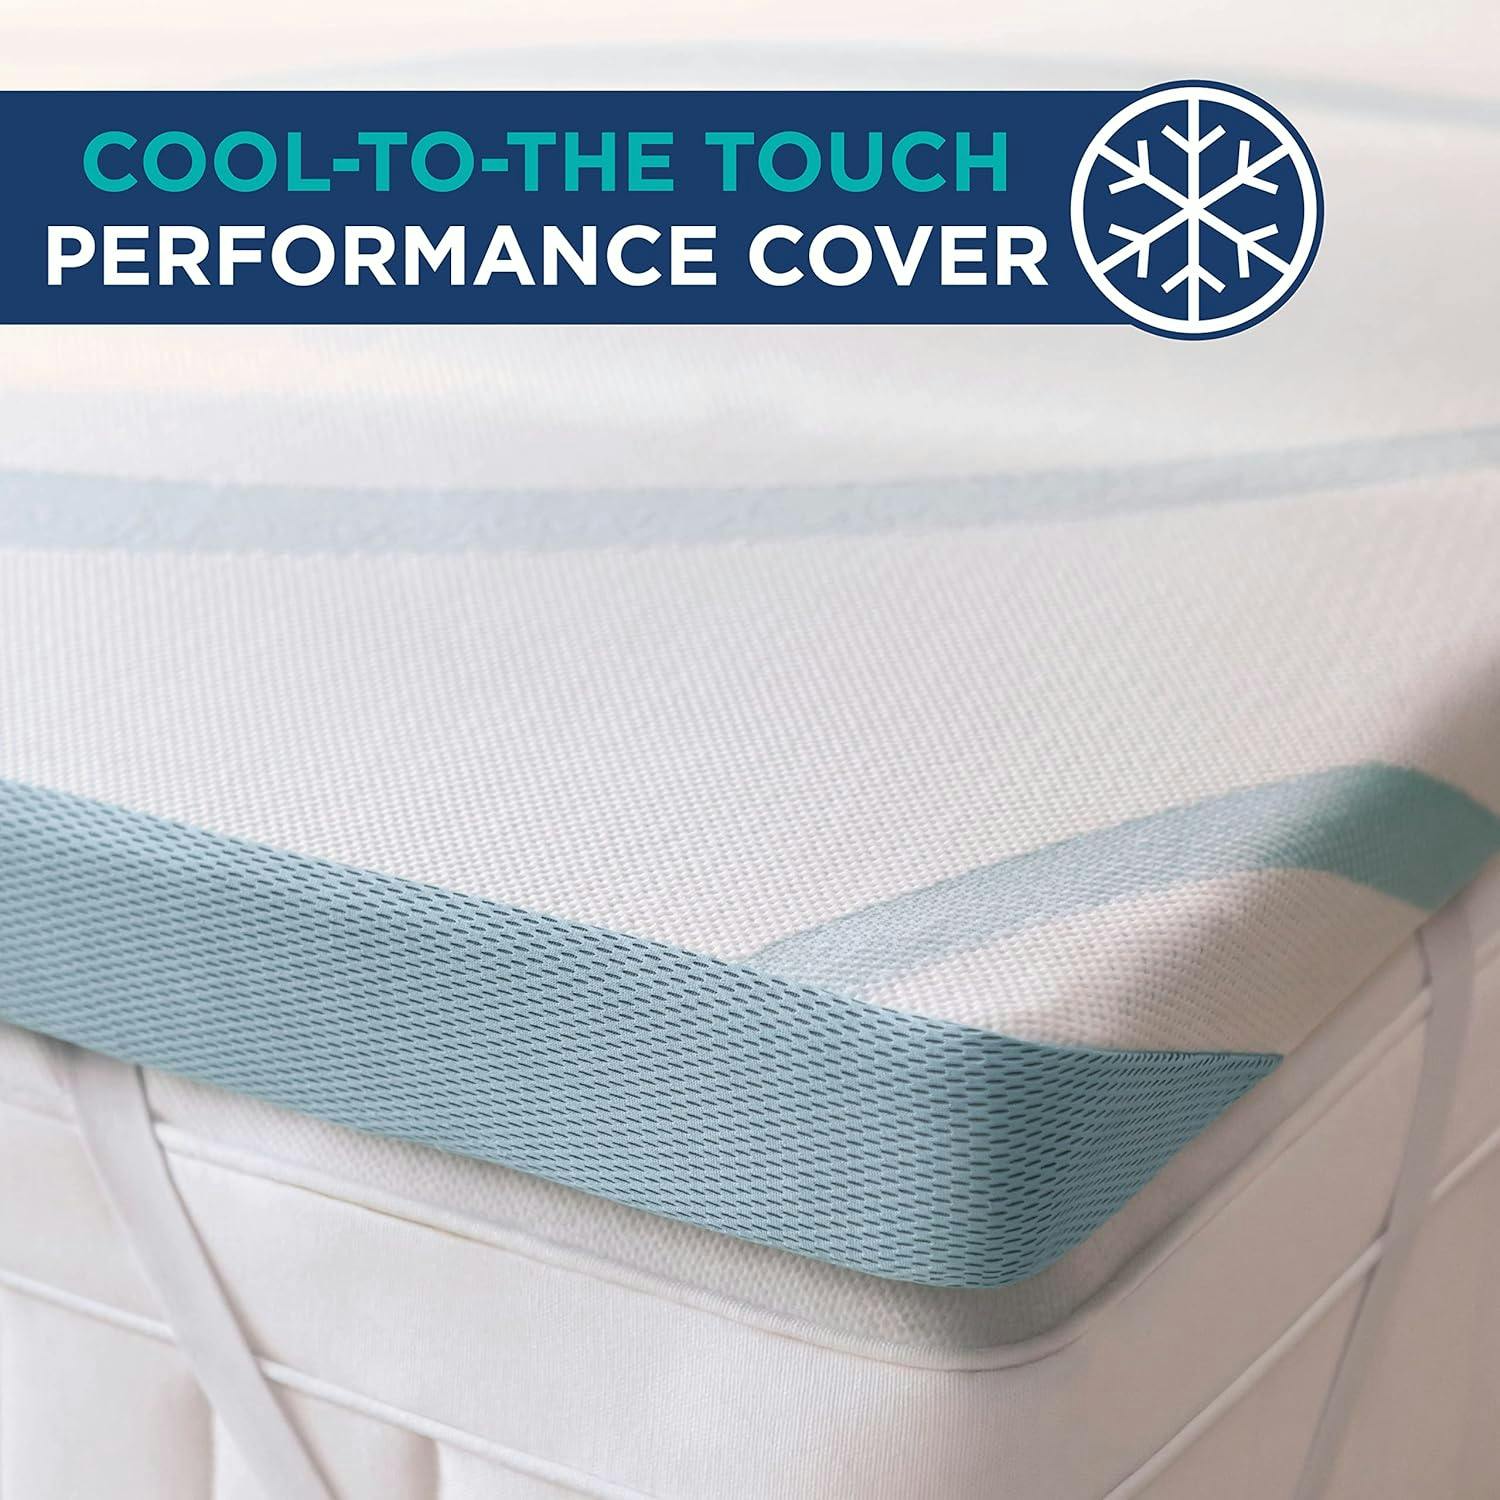 Cooling 3-Inch Full Memory Foam Mattress Topper with Washable Cover